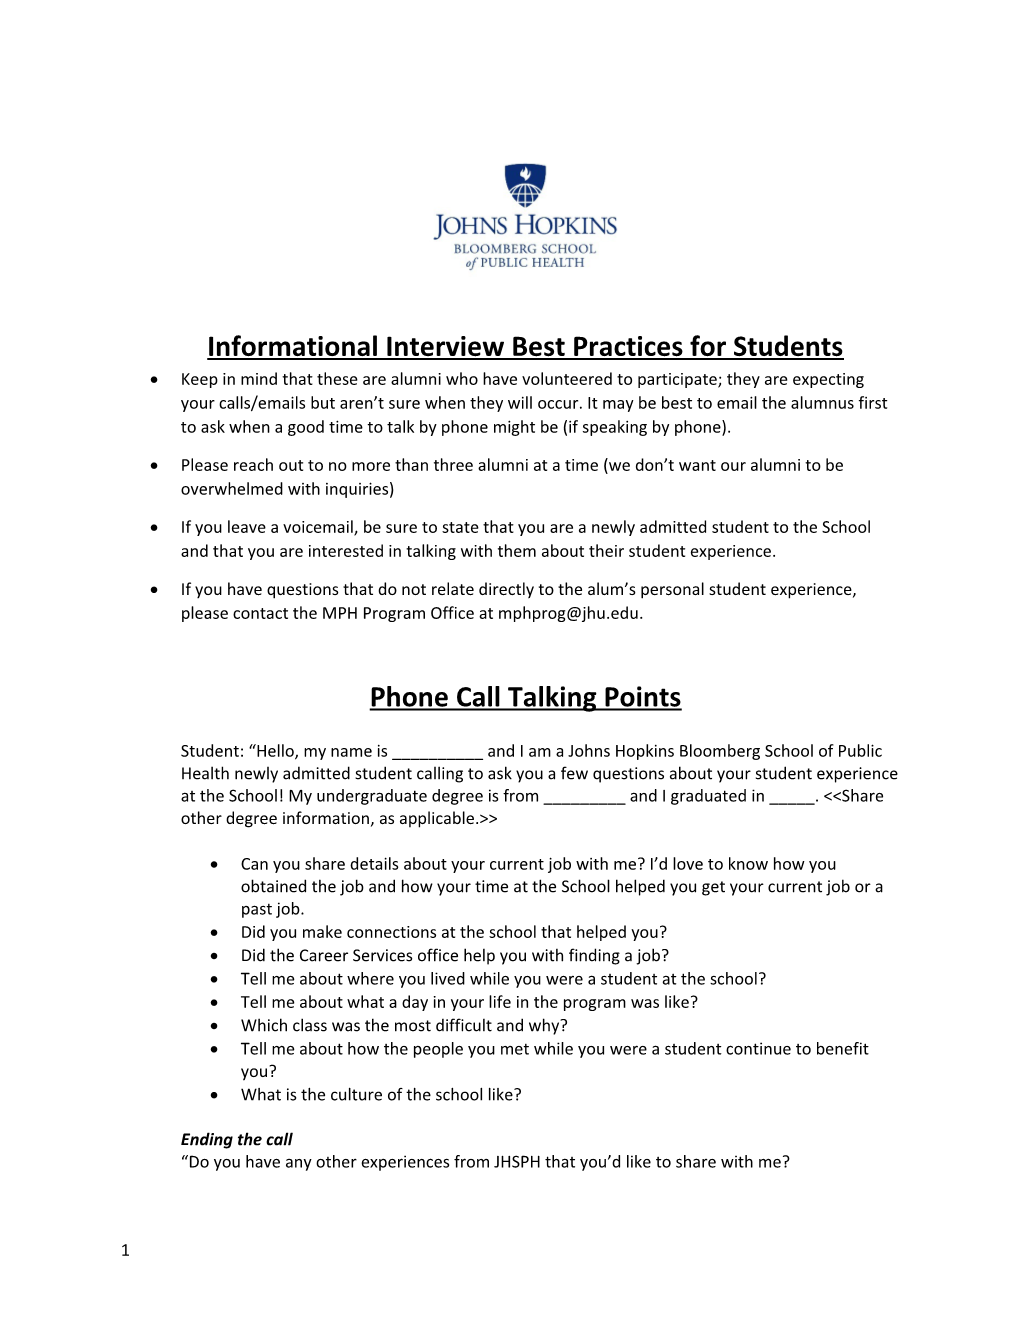 Informational Interview Best Practices for Students